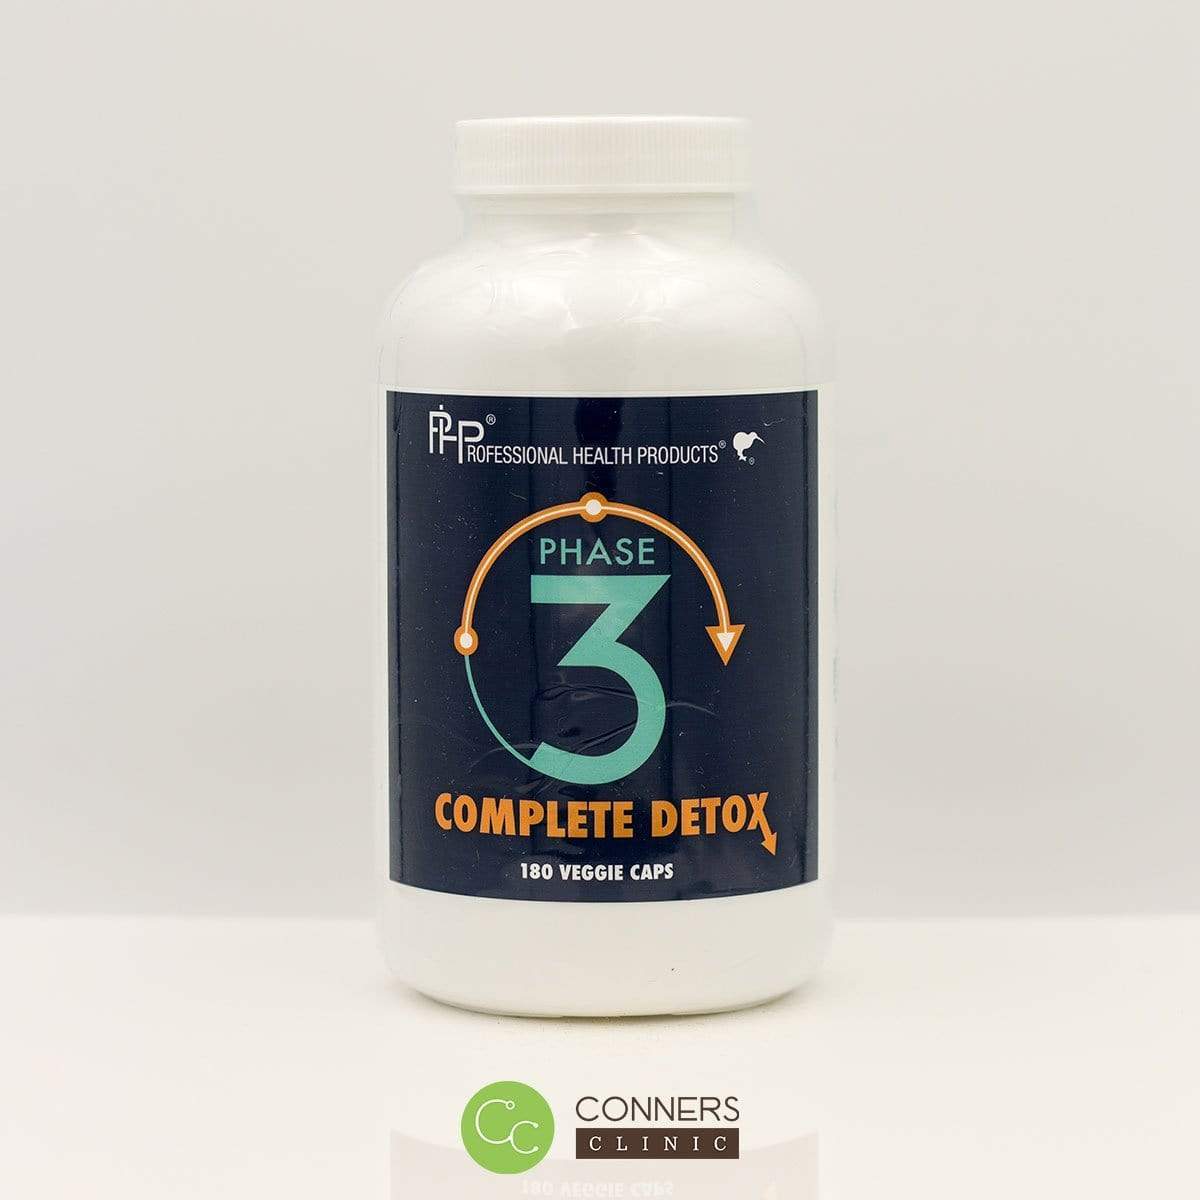 Phase 3 Complete Detox - Dr. Kelly Halderman Prof Health Products Supplement - Conners Clinic